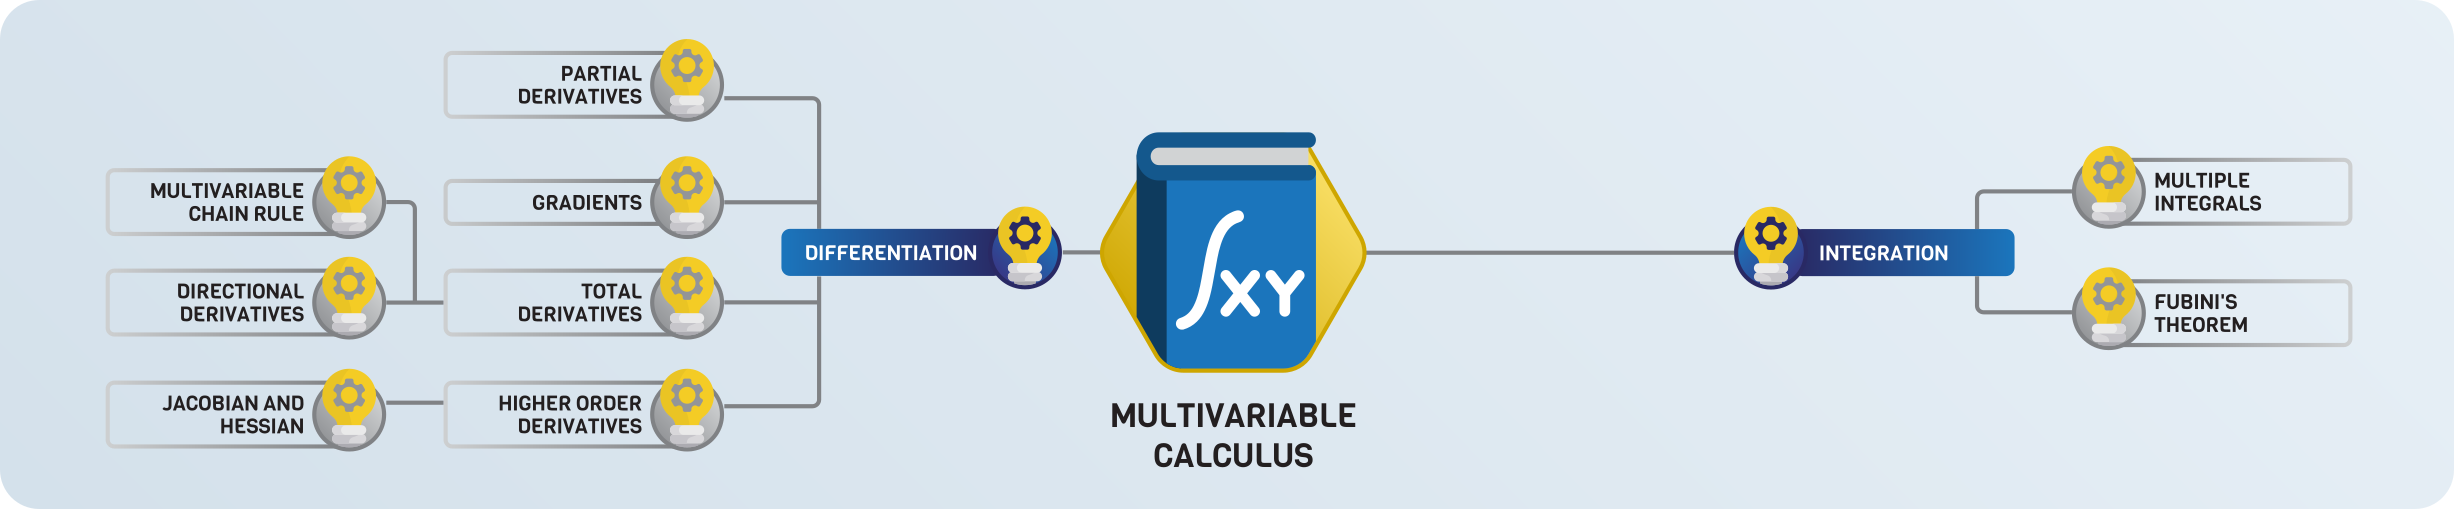 _images/04-multivariable-calculus.png